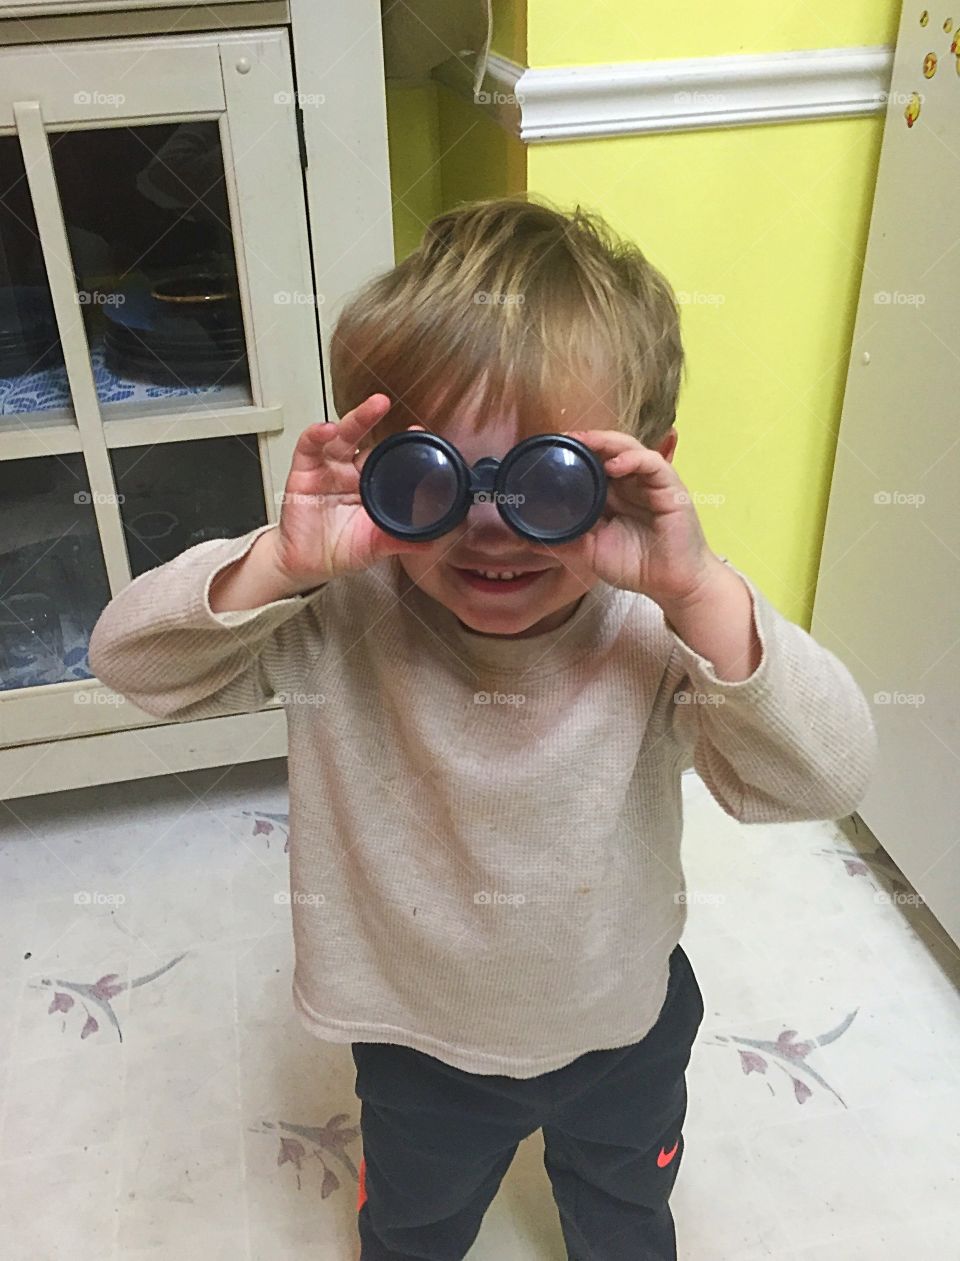 My two year old son, the spy!